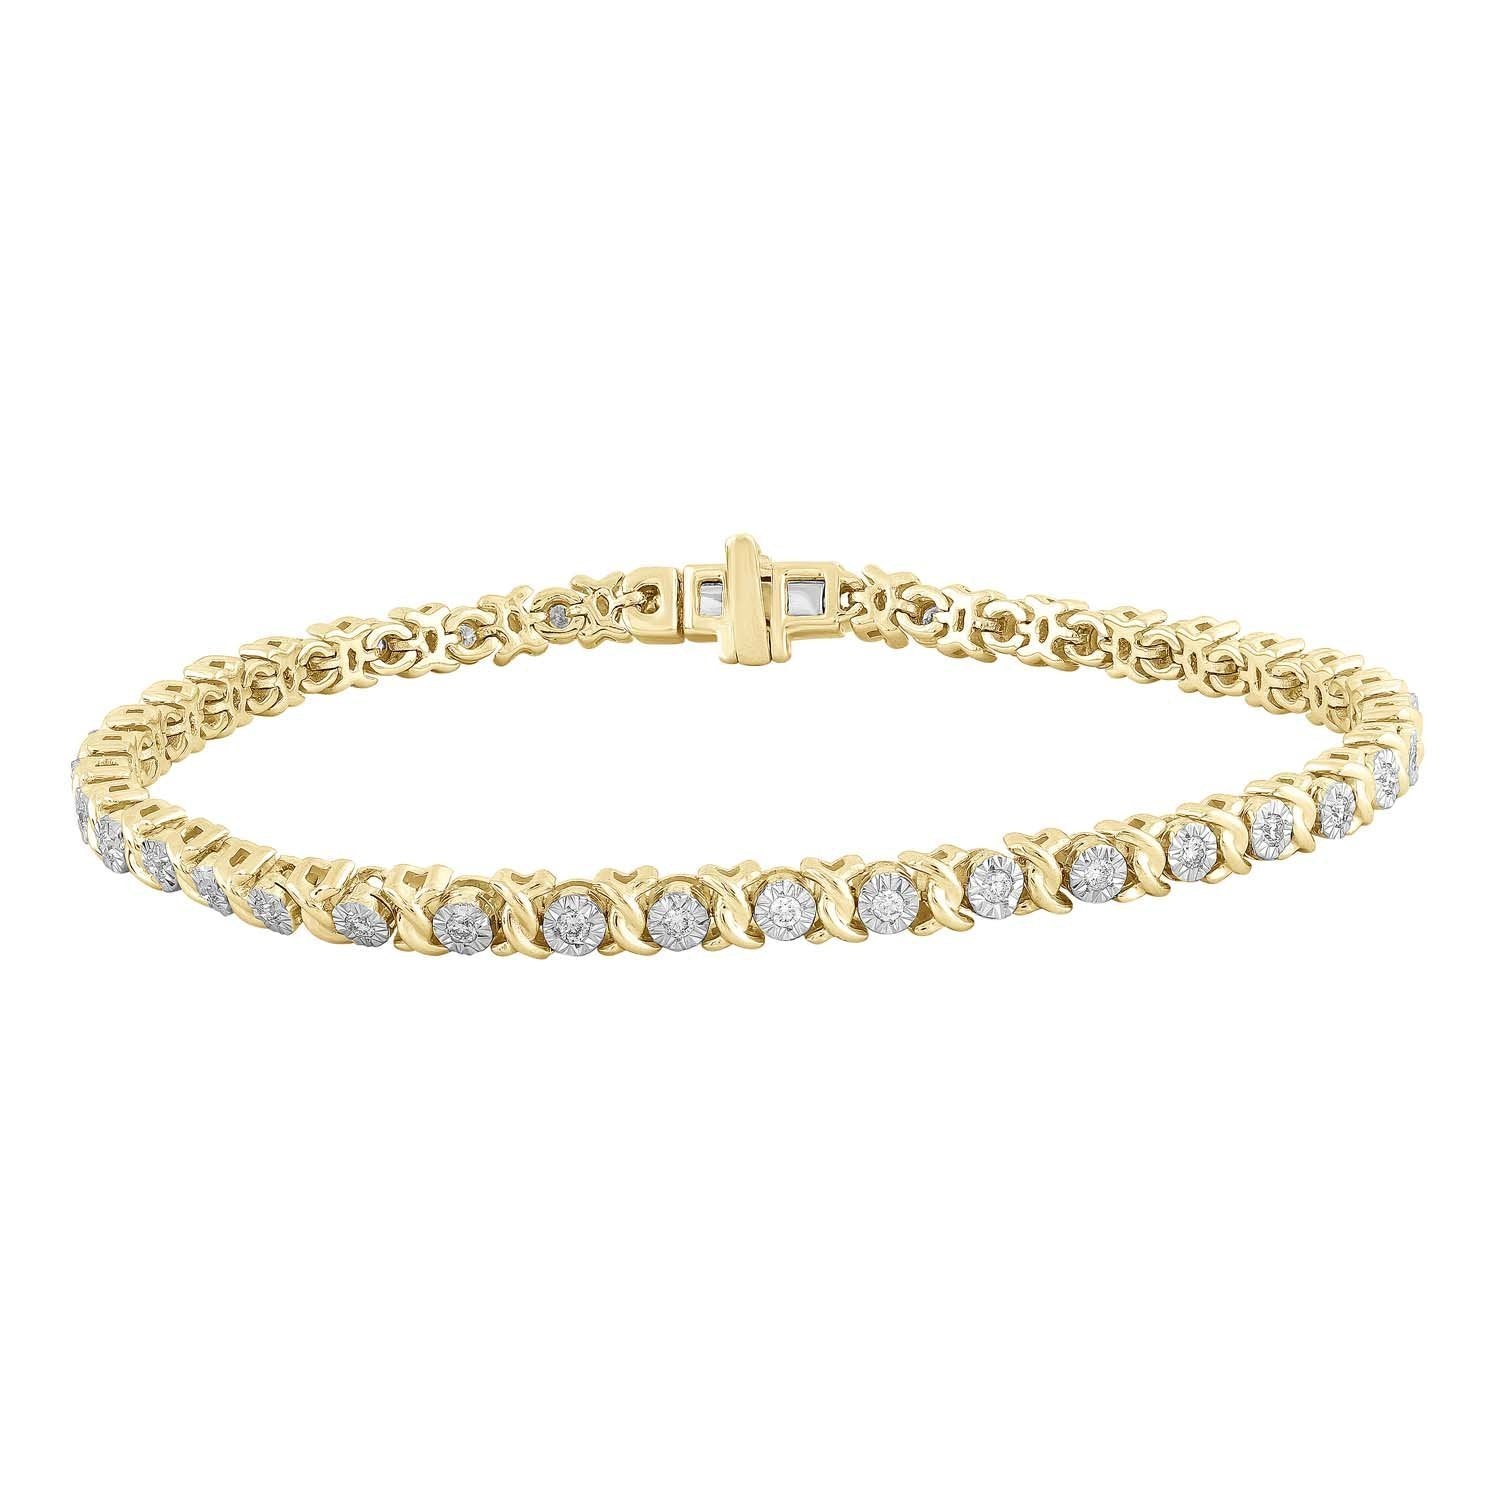 Bracelet with 0.5ct Diamonds in 9K Yellow Gold